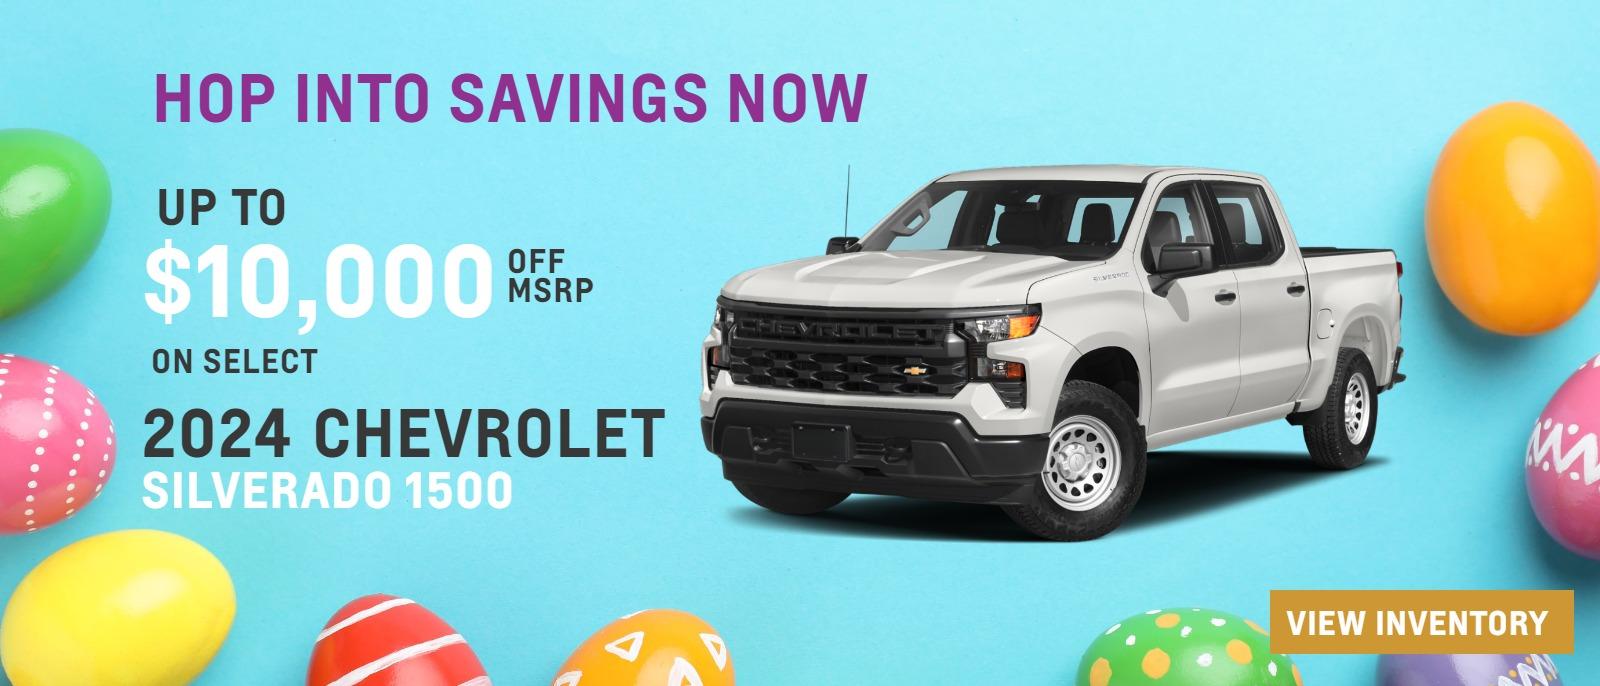 Up to $10,000 off MSRP on select 2024 Silverado 1500